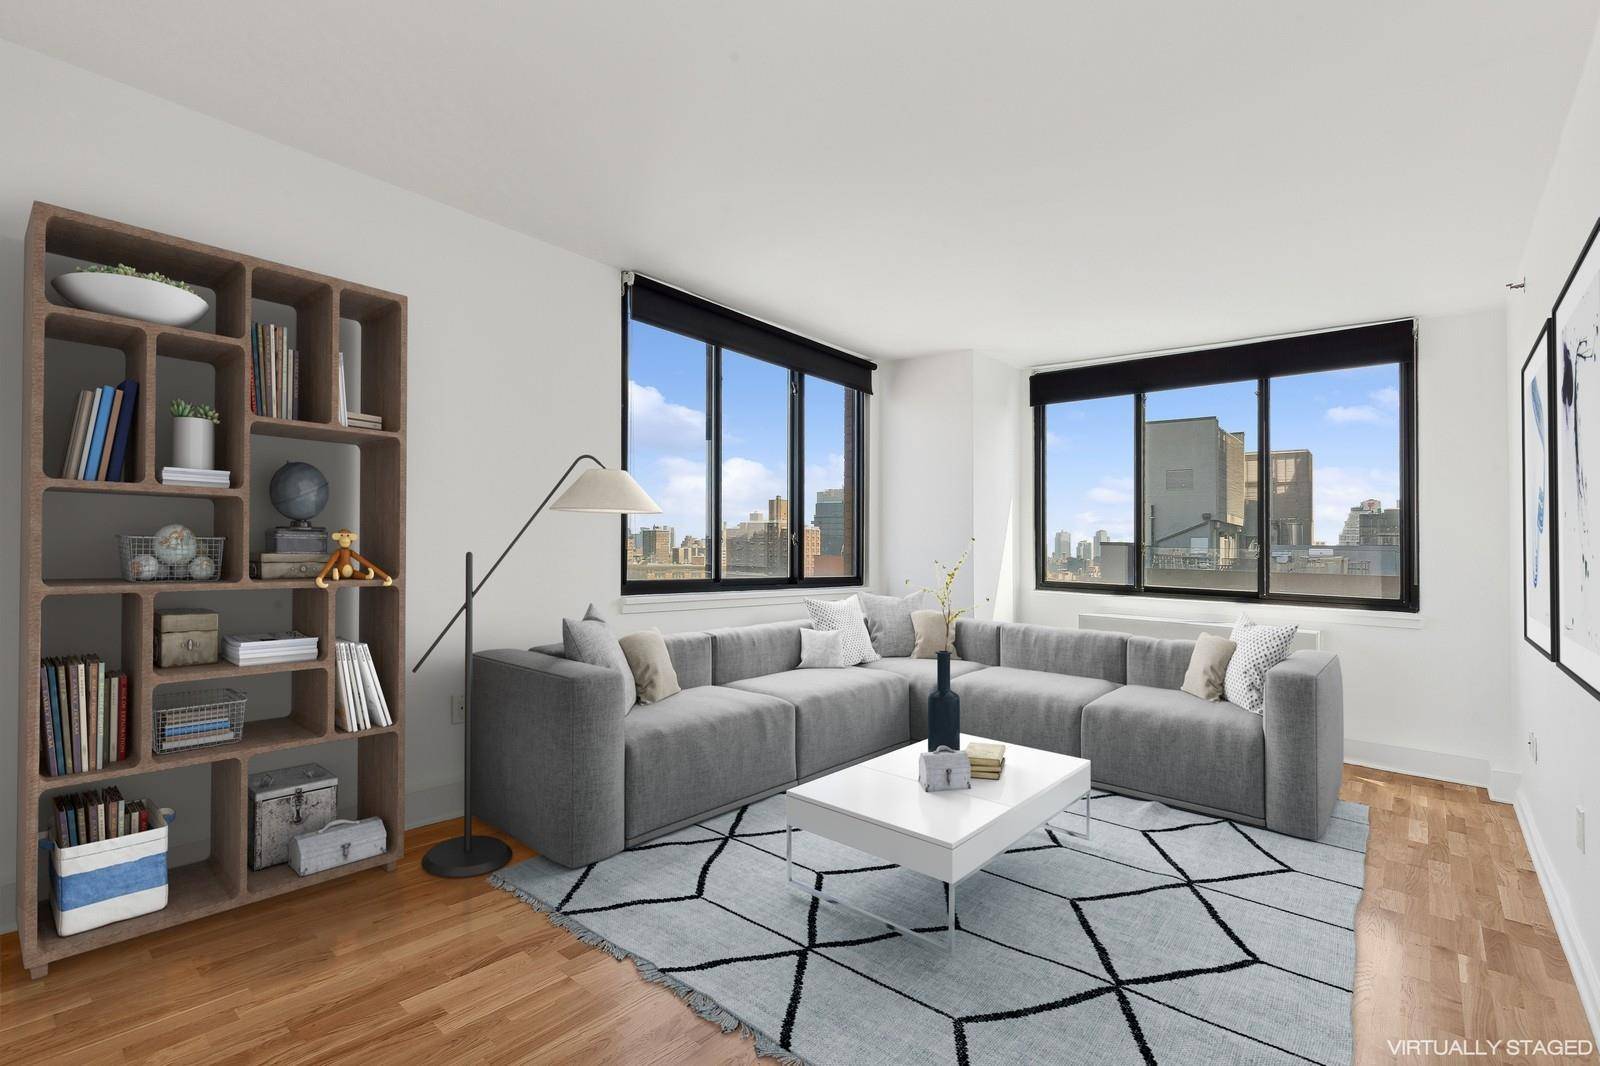 Located in the heart of Nolita, and just off Spring Street, stands Nolita Place A boutique full service condominium.